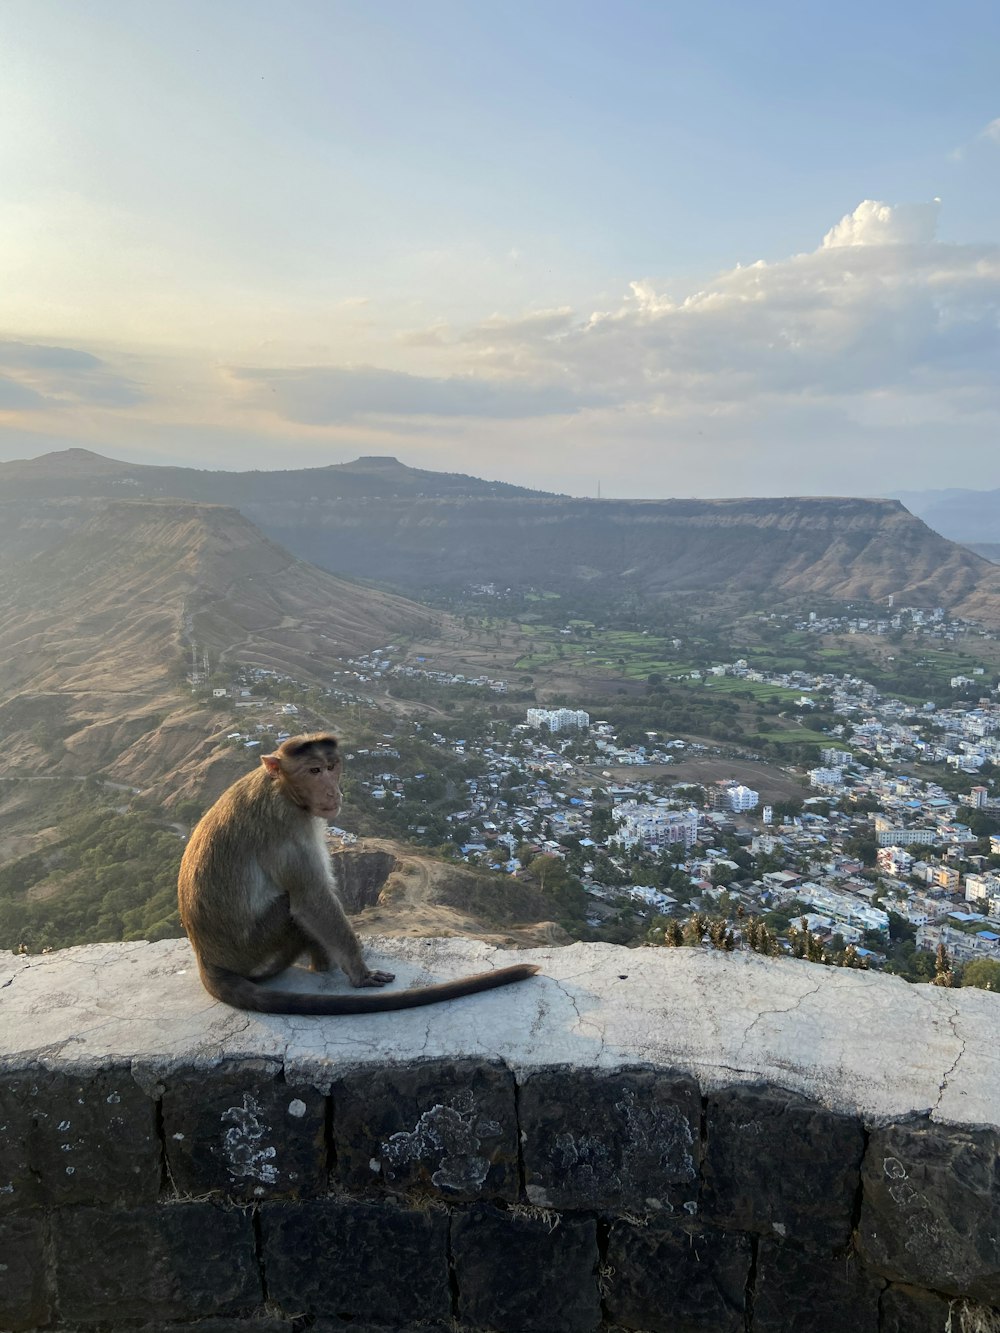 a monkey sitting on a ledge overlooking a valley